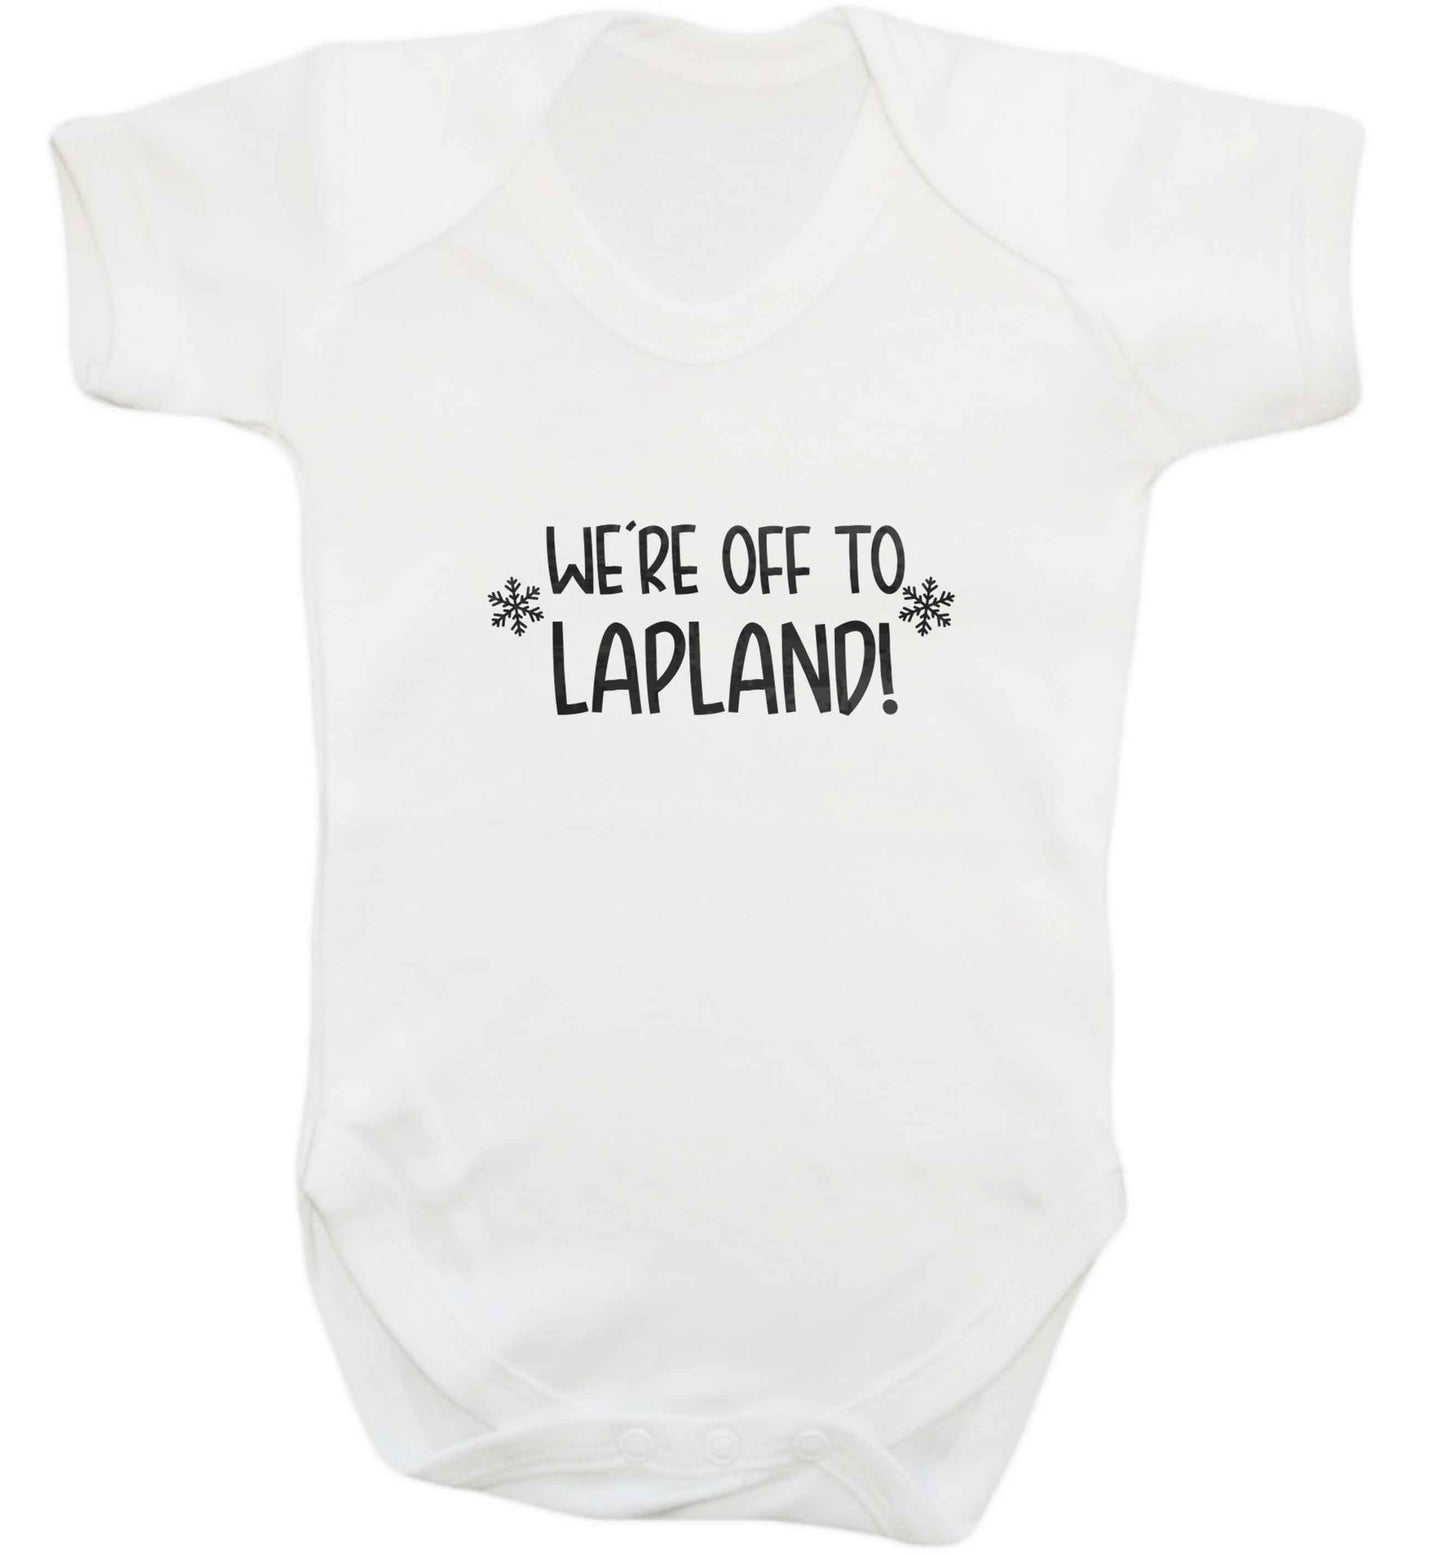 We're off to Lapland baby vest white 18-24 months